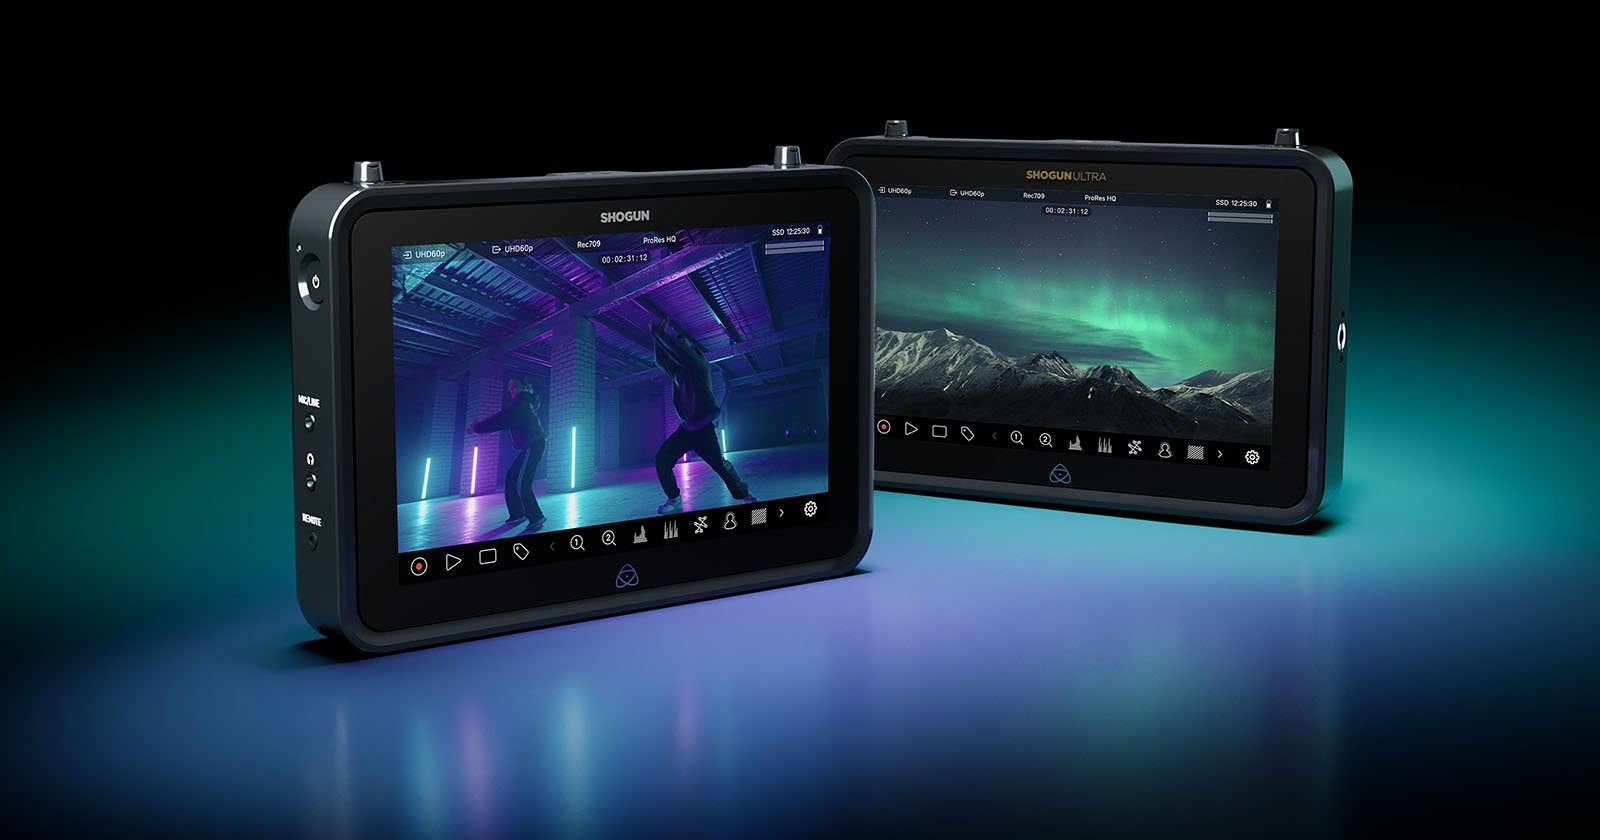 The new Atomos Shogun and Shogun ultra camera-mountable recorder are seen together against a black background as the screens light up the forefront.